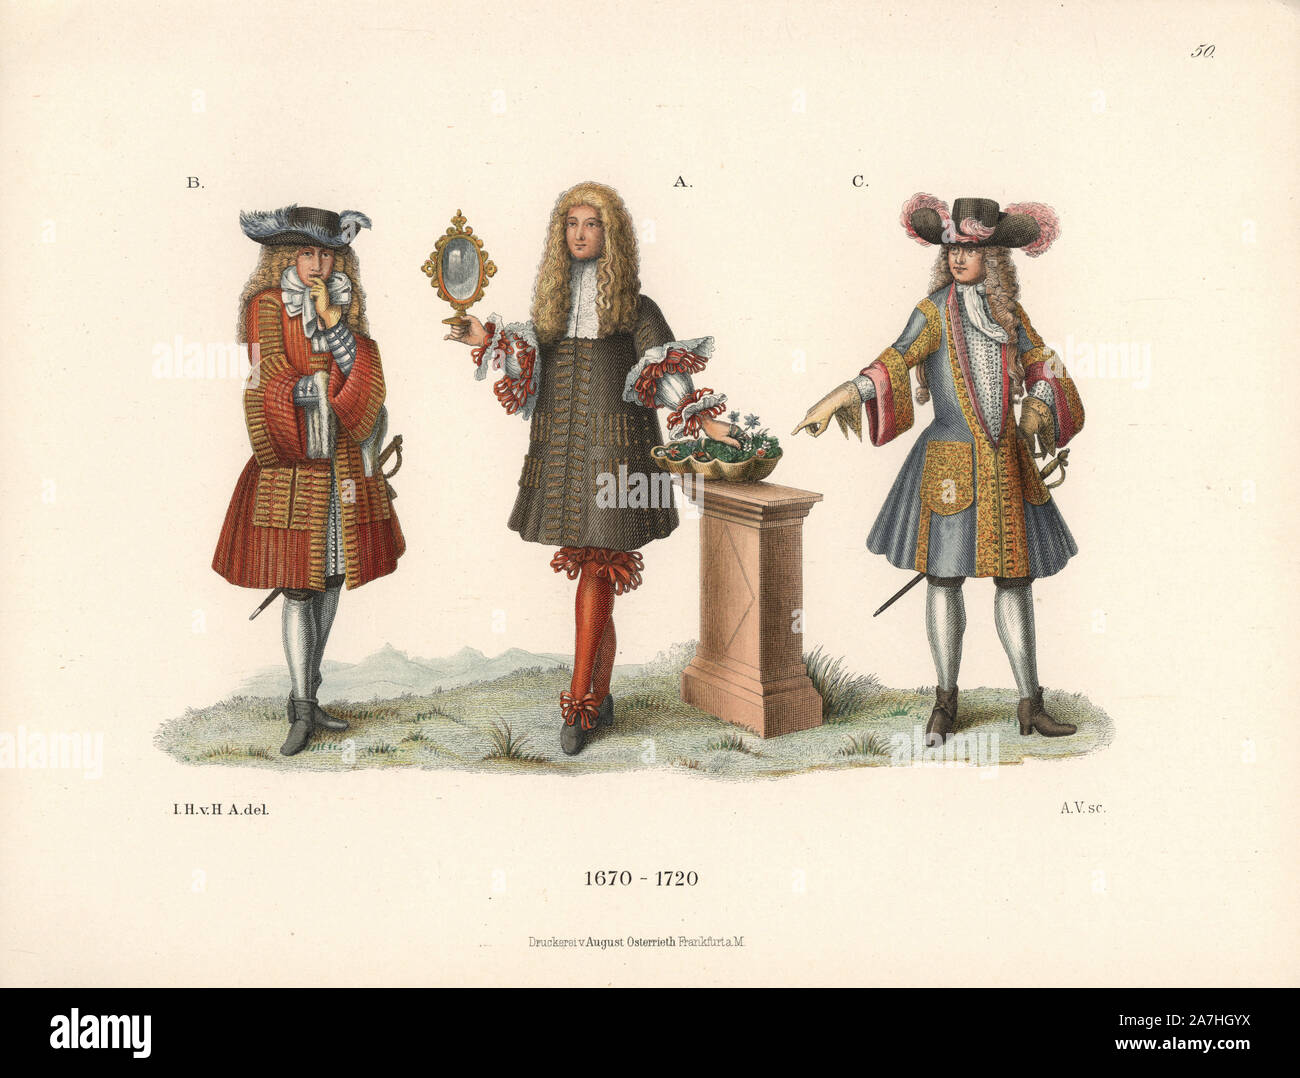 Noblemen of the late 17th century. The man in the middle is King Louis XIV of France, the Sun King, from an oil painting on alabaster in Heidelberg. The other men are French cavaliers from the reign of Louis XVI. Chromolithograph from Hefner-Alteneck's 'Costumes, Artworks and Appliances from the Middle Ages to the 18th Century,' Frankfurt, 1889. Illustration by Dr. Jakob Heinrich von Hefner-Alteneck, lithograph by A. Volkert and published by Heinrich Keller. Dr. Hefner-Alteneck (1811 - 1903) was a German curator, archaeologist, art historian, illustrator and etcher. Stock Photo